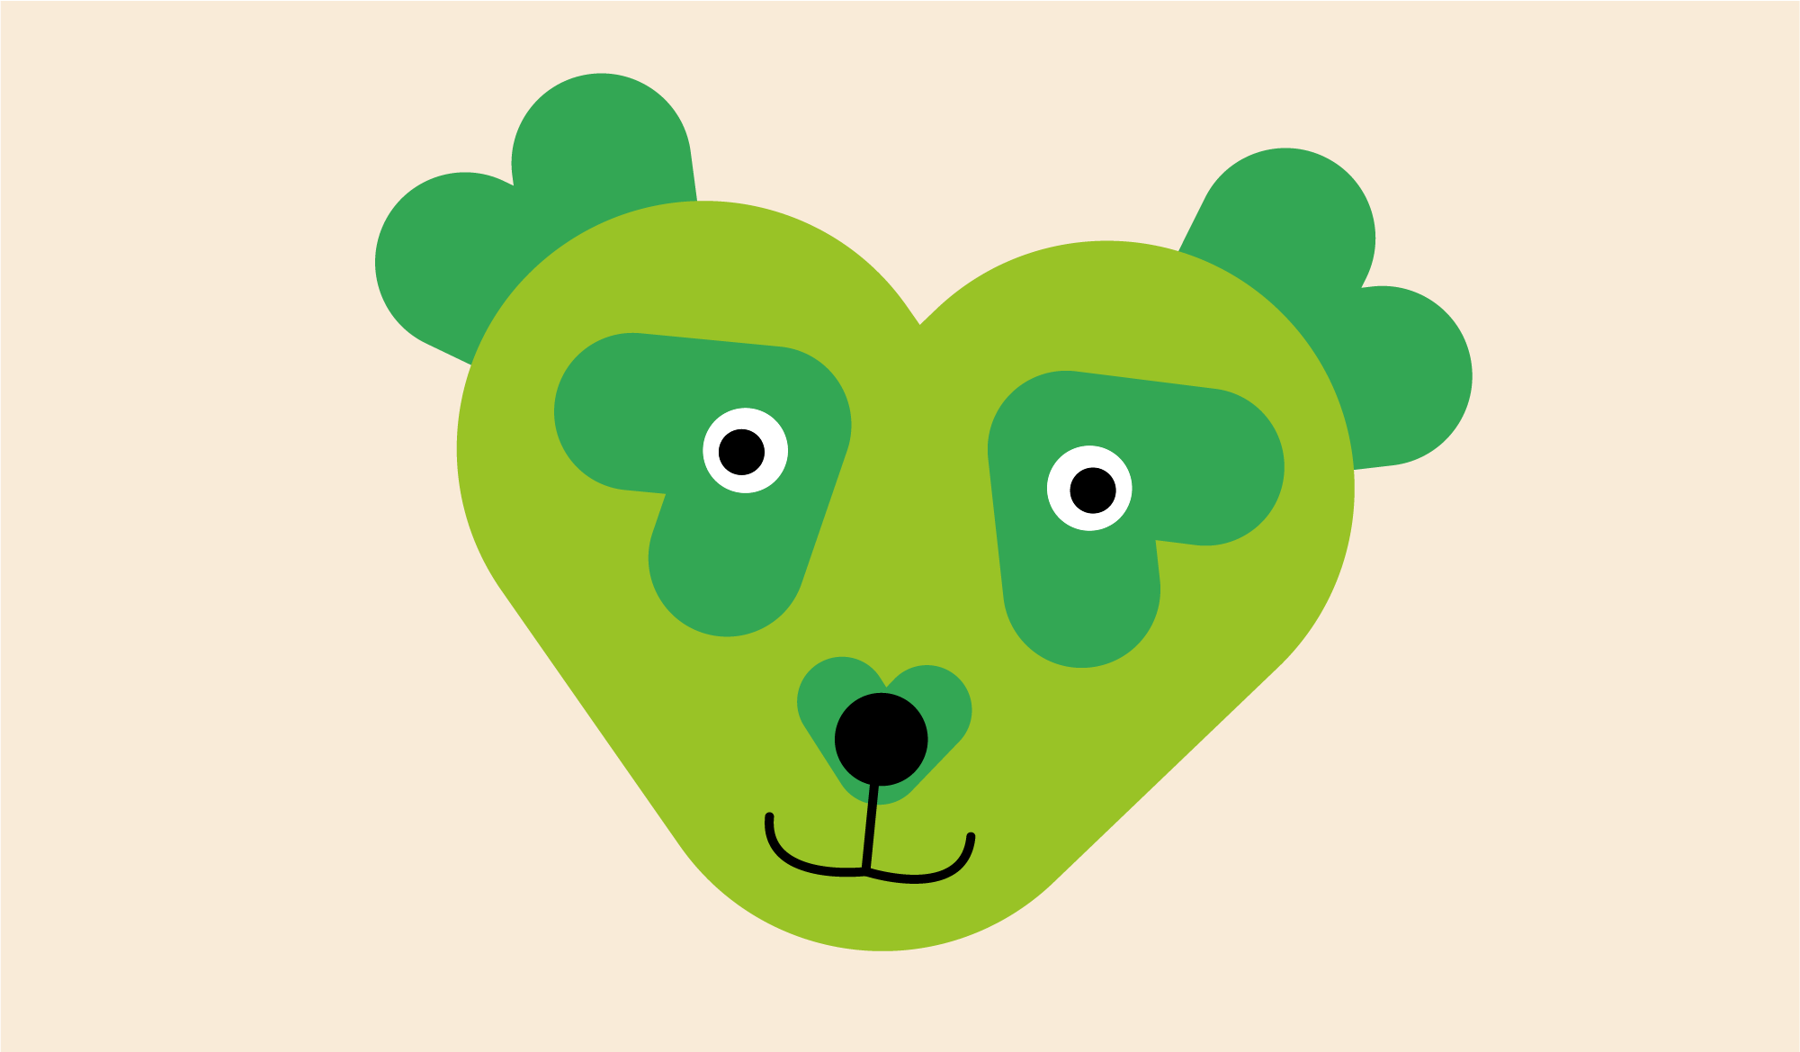 An image of a panda made from green heart shapes